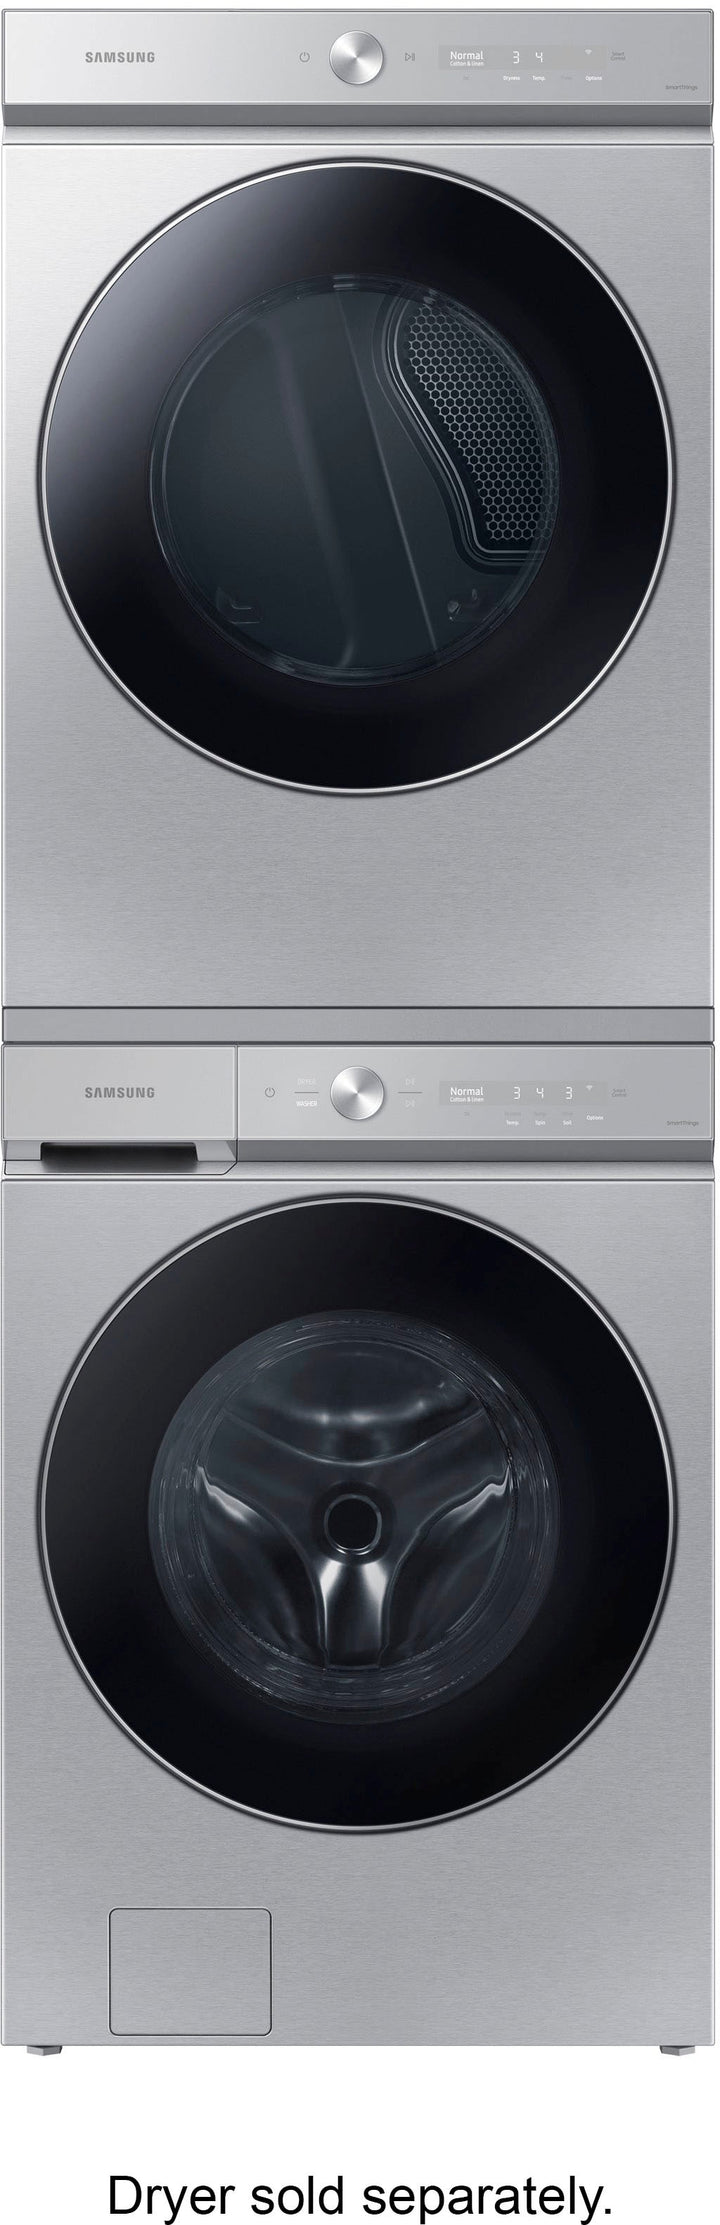 Samsung - Bespoke 5.3 cu. ft. Ultra Capacity Front Load Washer with AI OptiWash and Auto Dispense - Silver steel_10